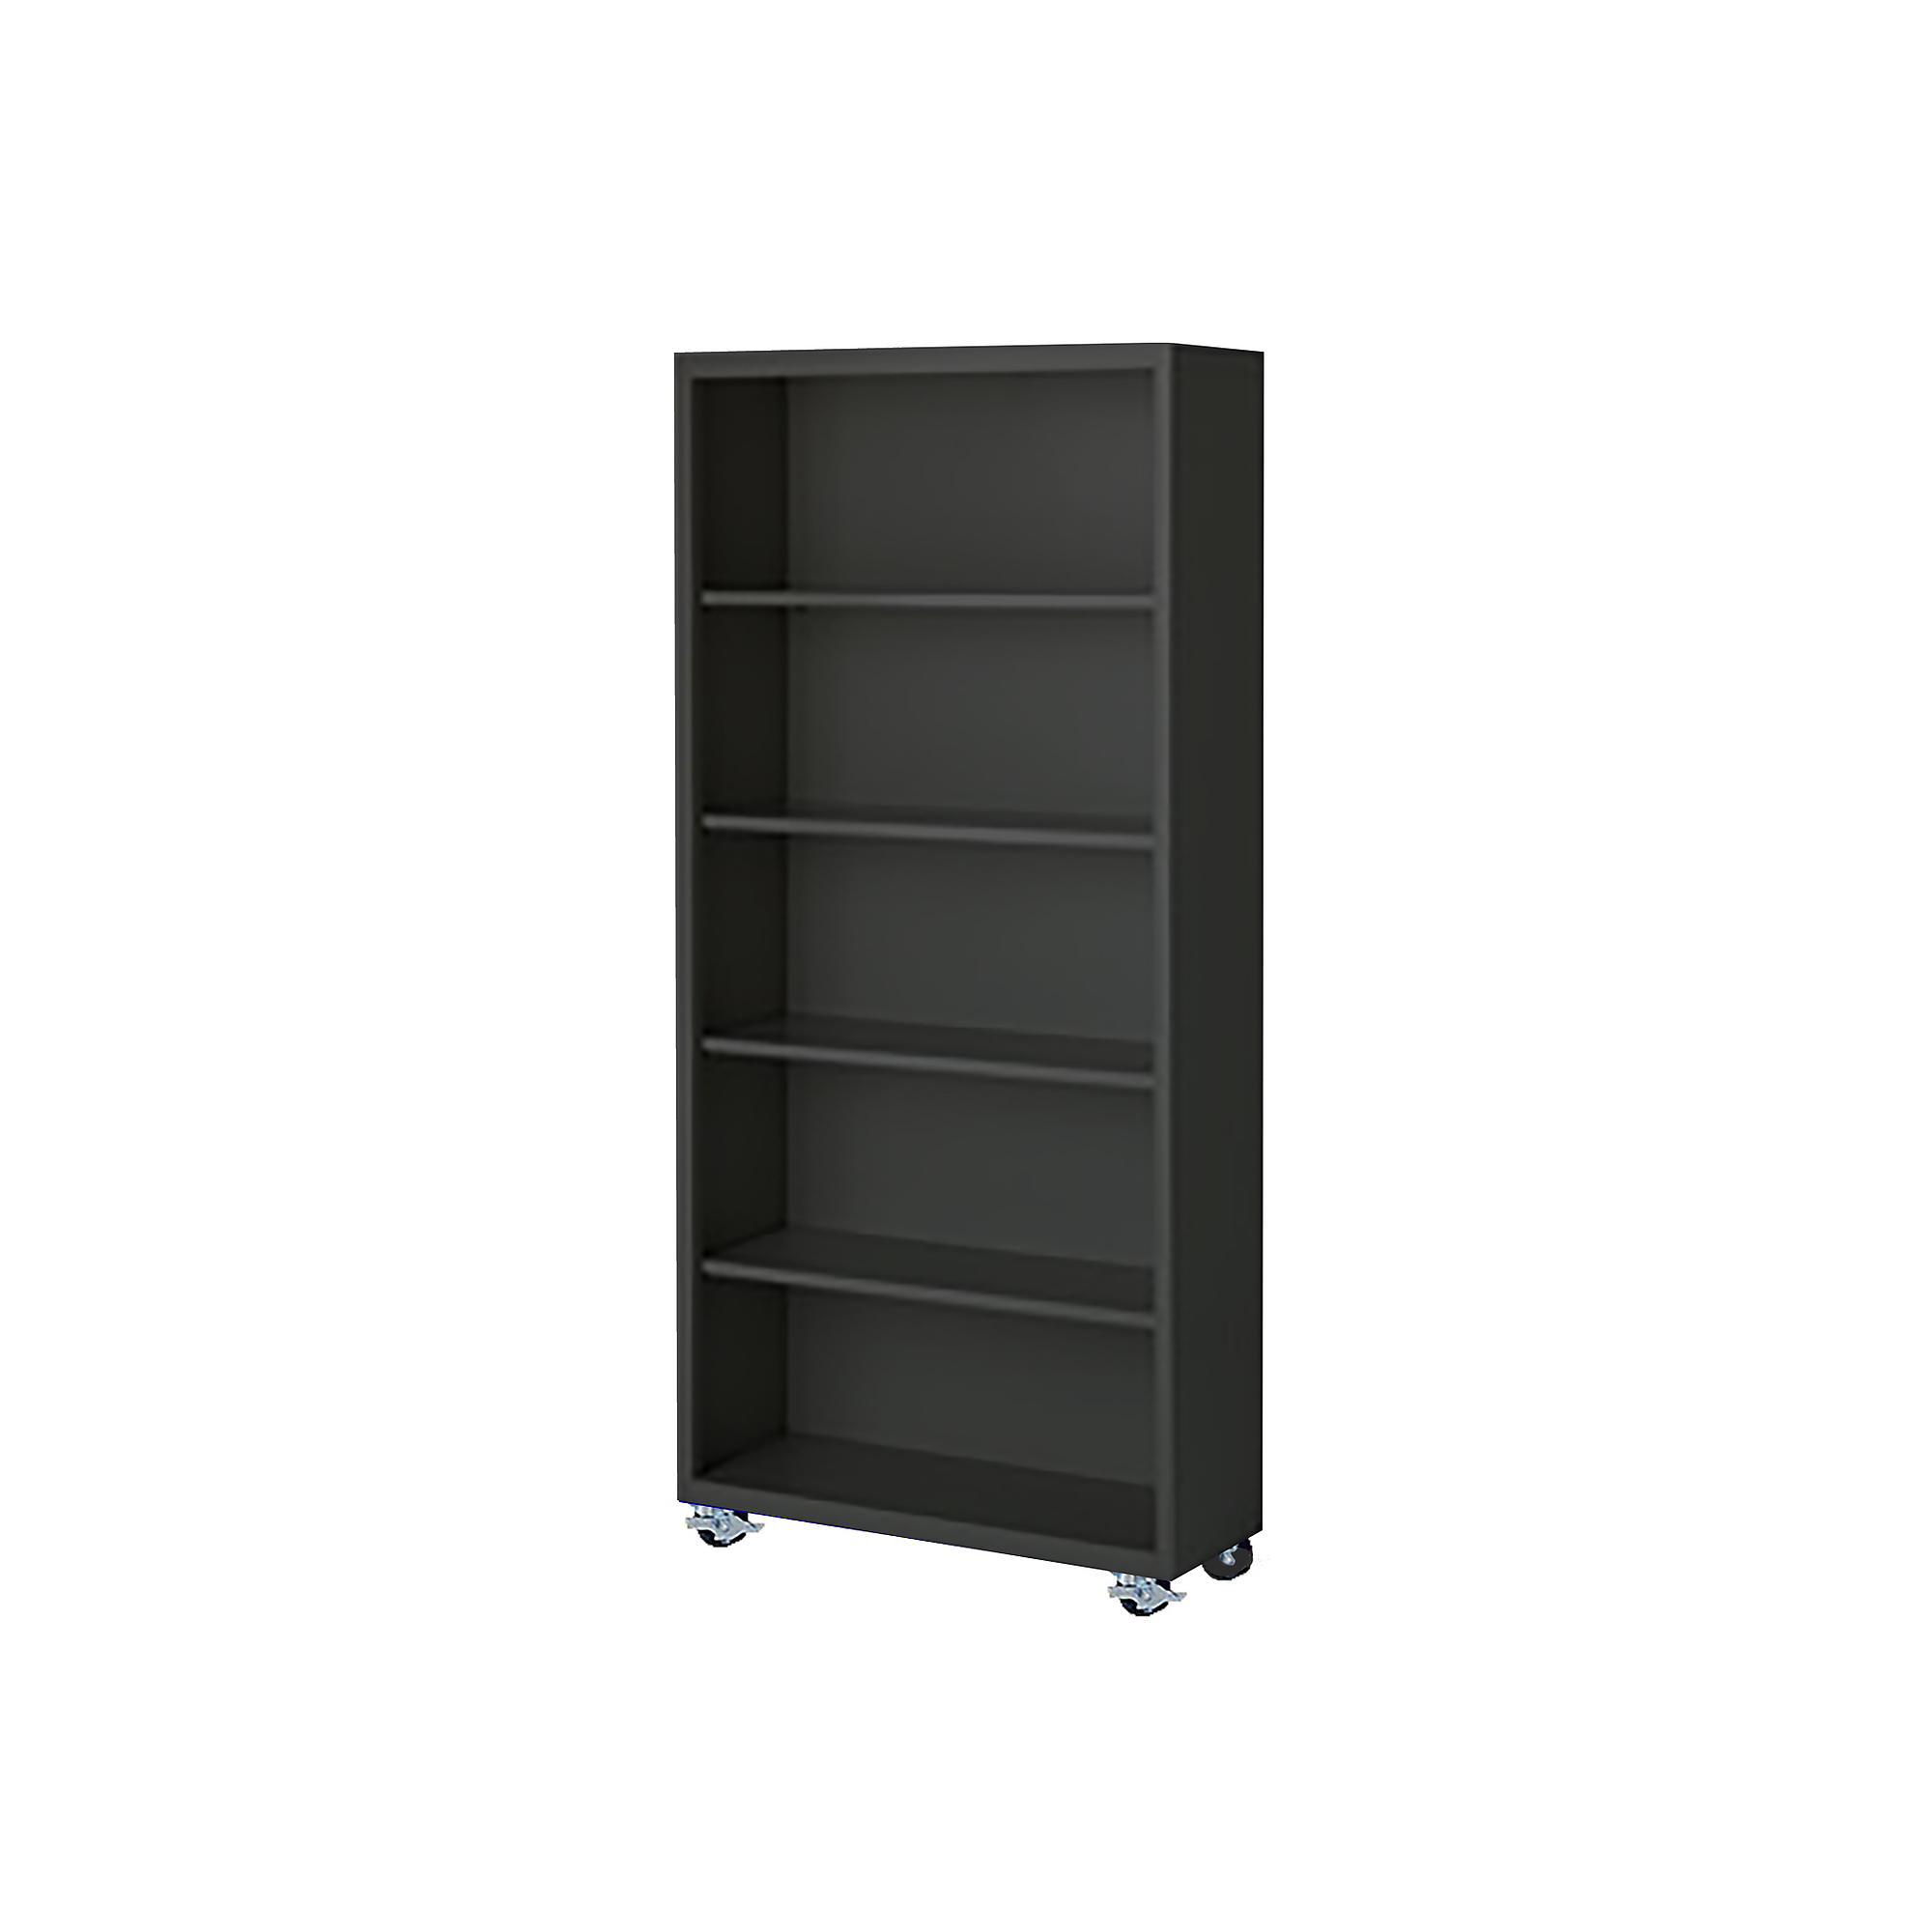 Steel Cabinets USA, 36Inchx18Inchx75Inch Charcoal Mobile Bookcase Assembled, Height 75 in, Shelves (qty.) 5, Material Steel, Model MBCA-367518-C